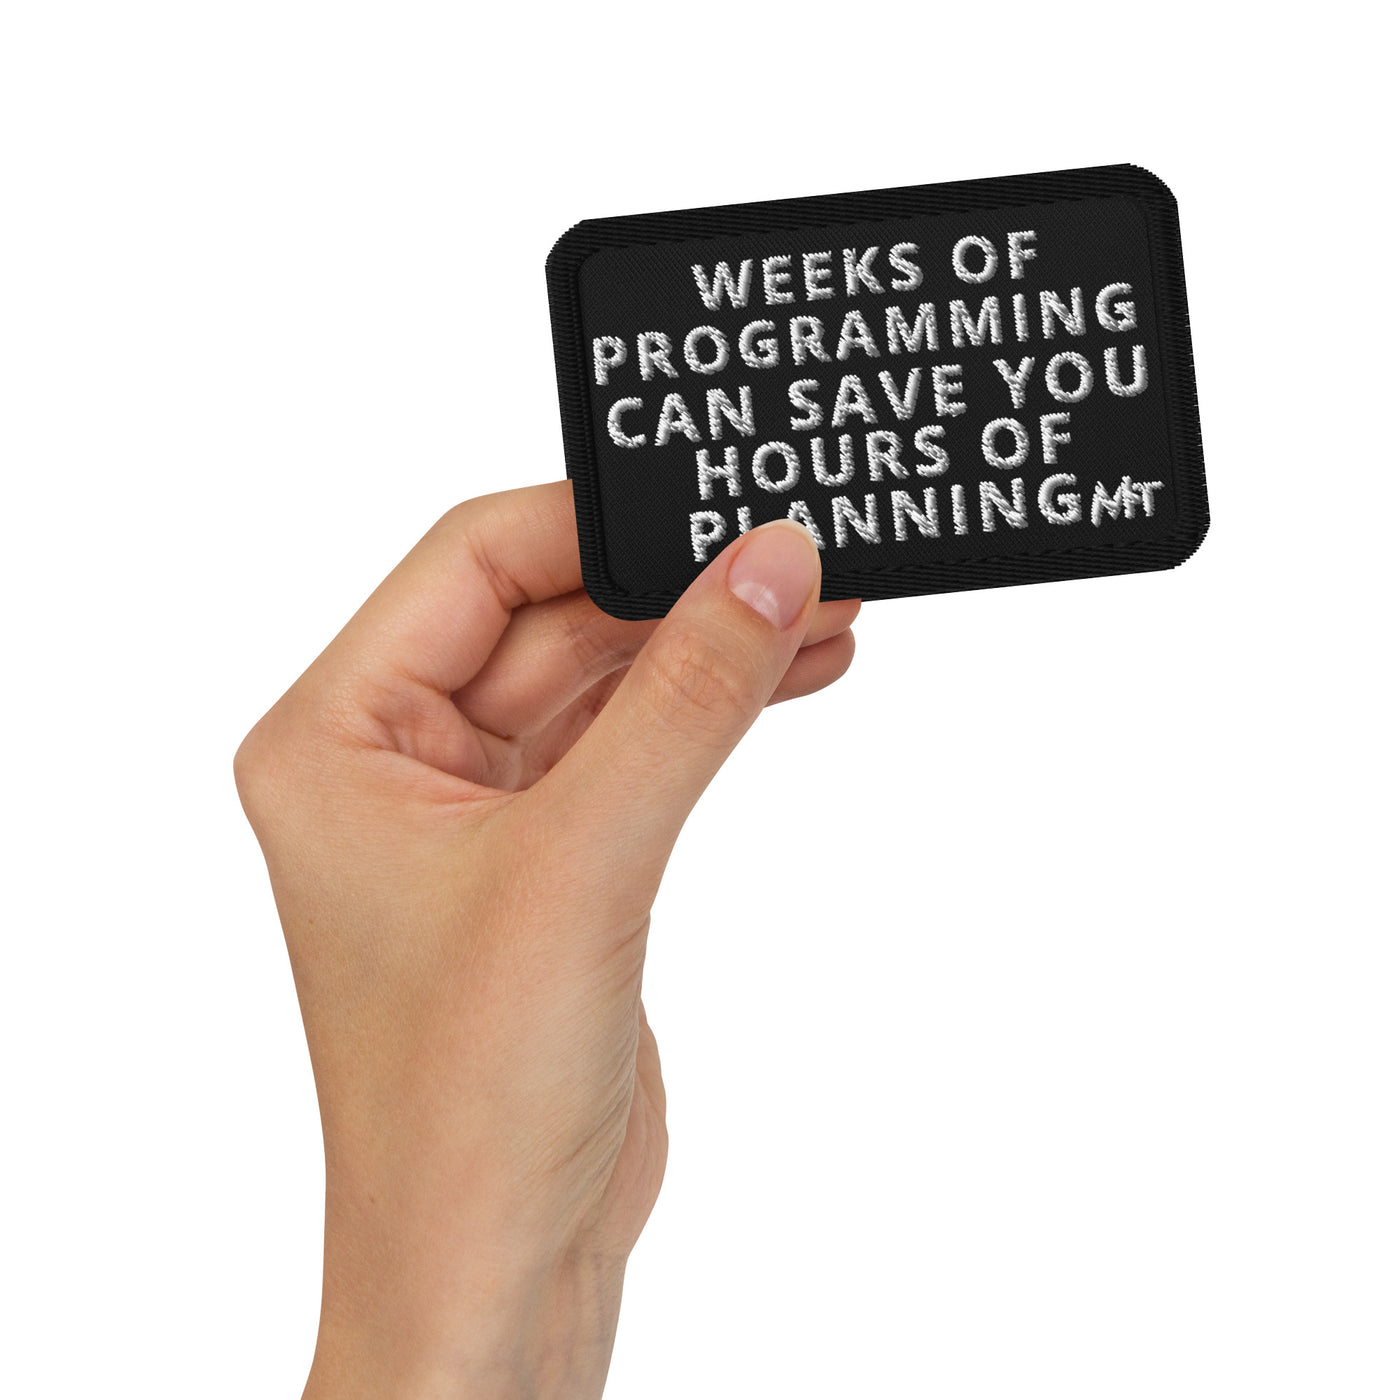 Weeks of Programming can save you Hours of Planning - Embroidered patches